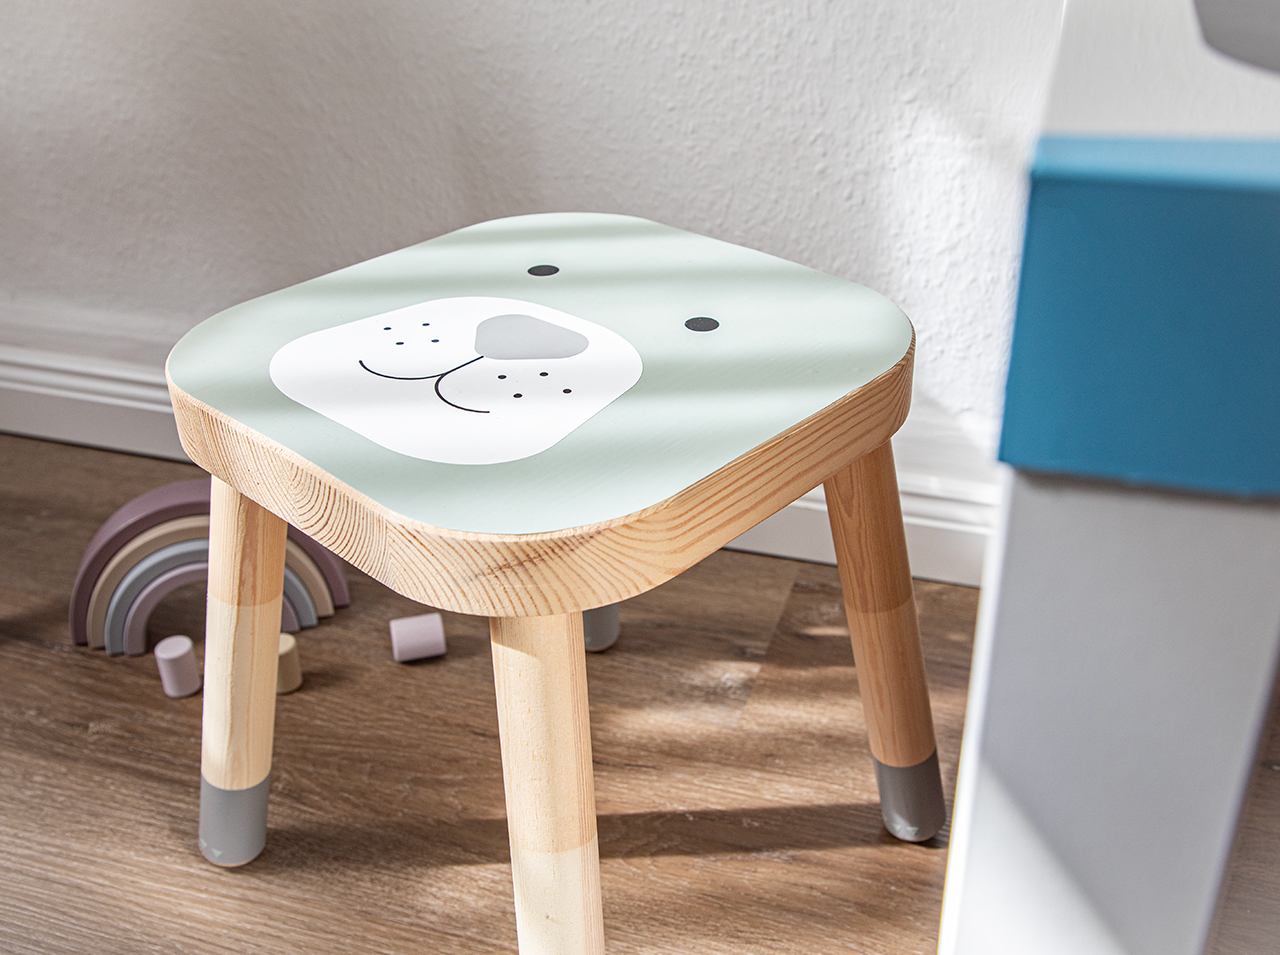 Low stool for children with friendly animal face on the seat.